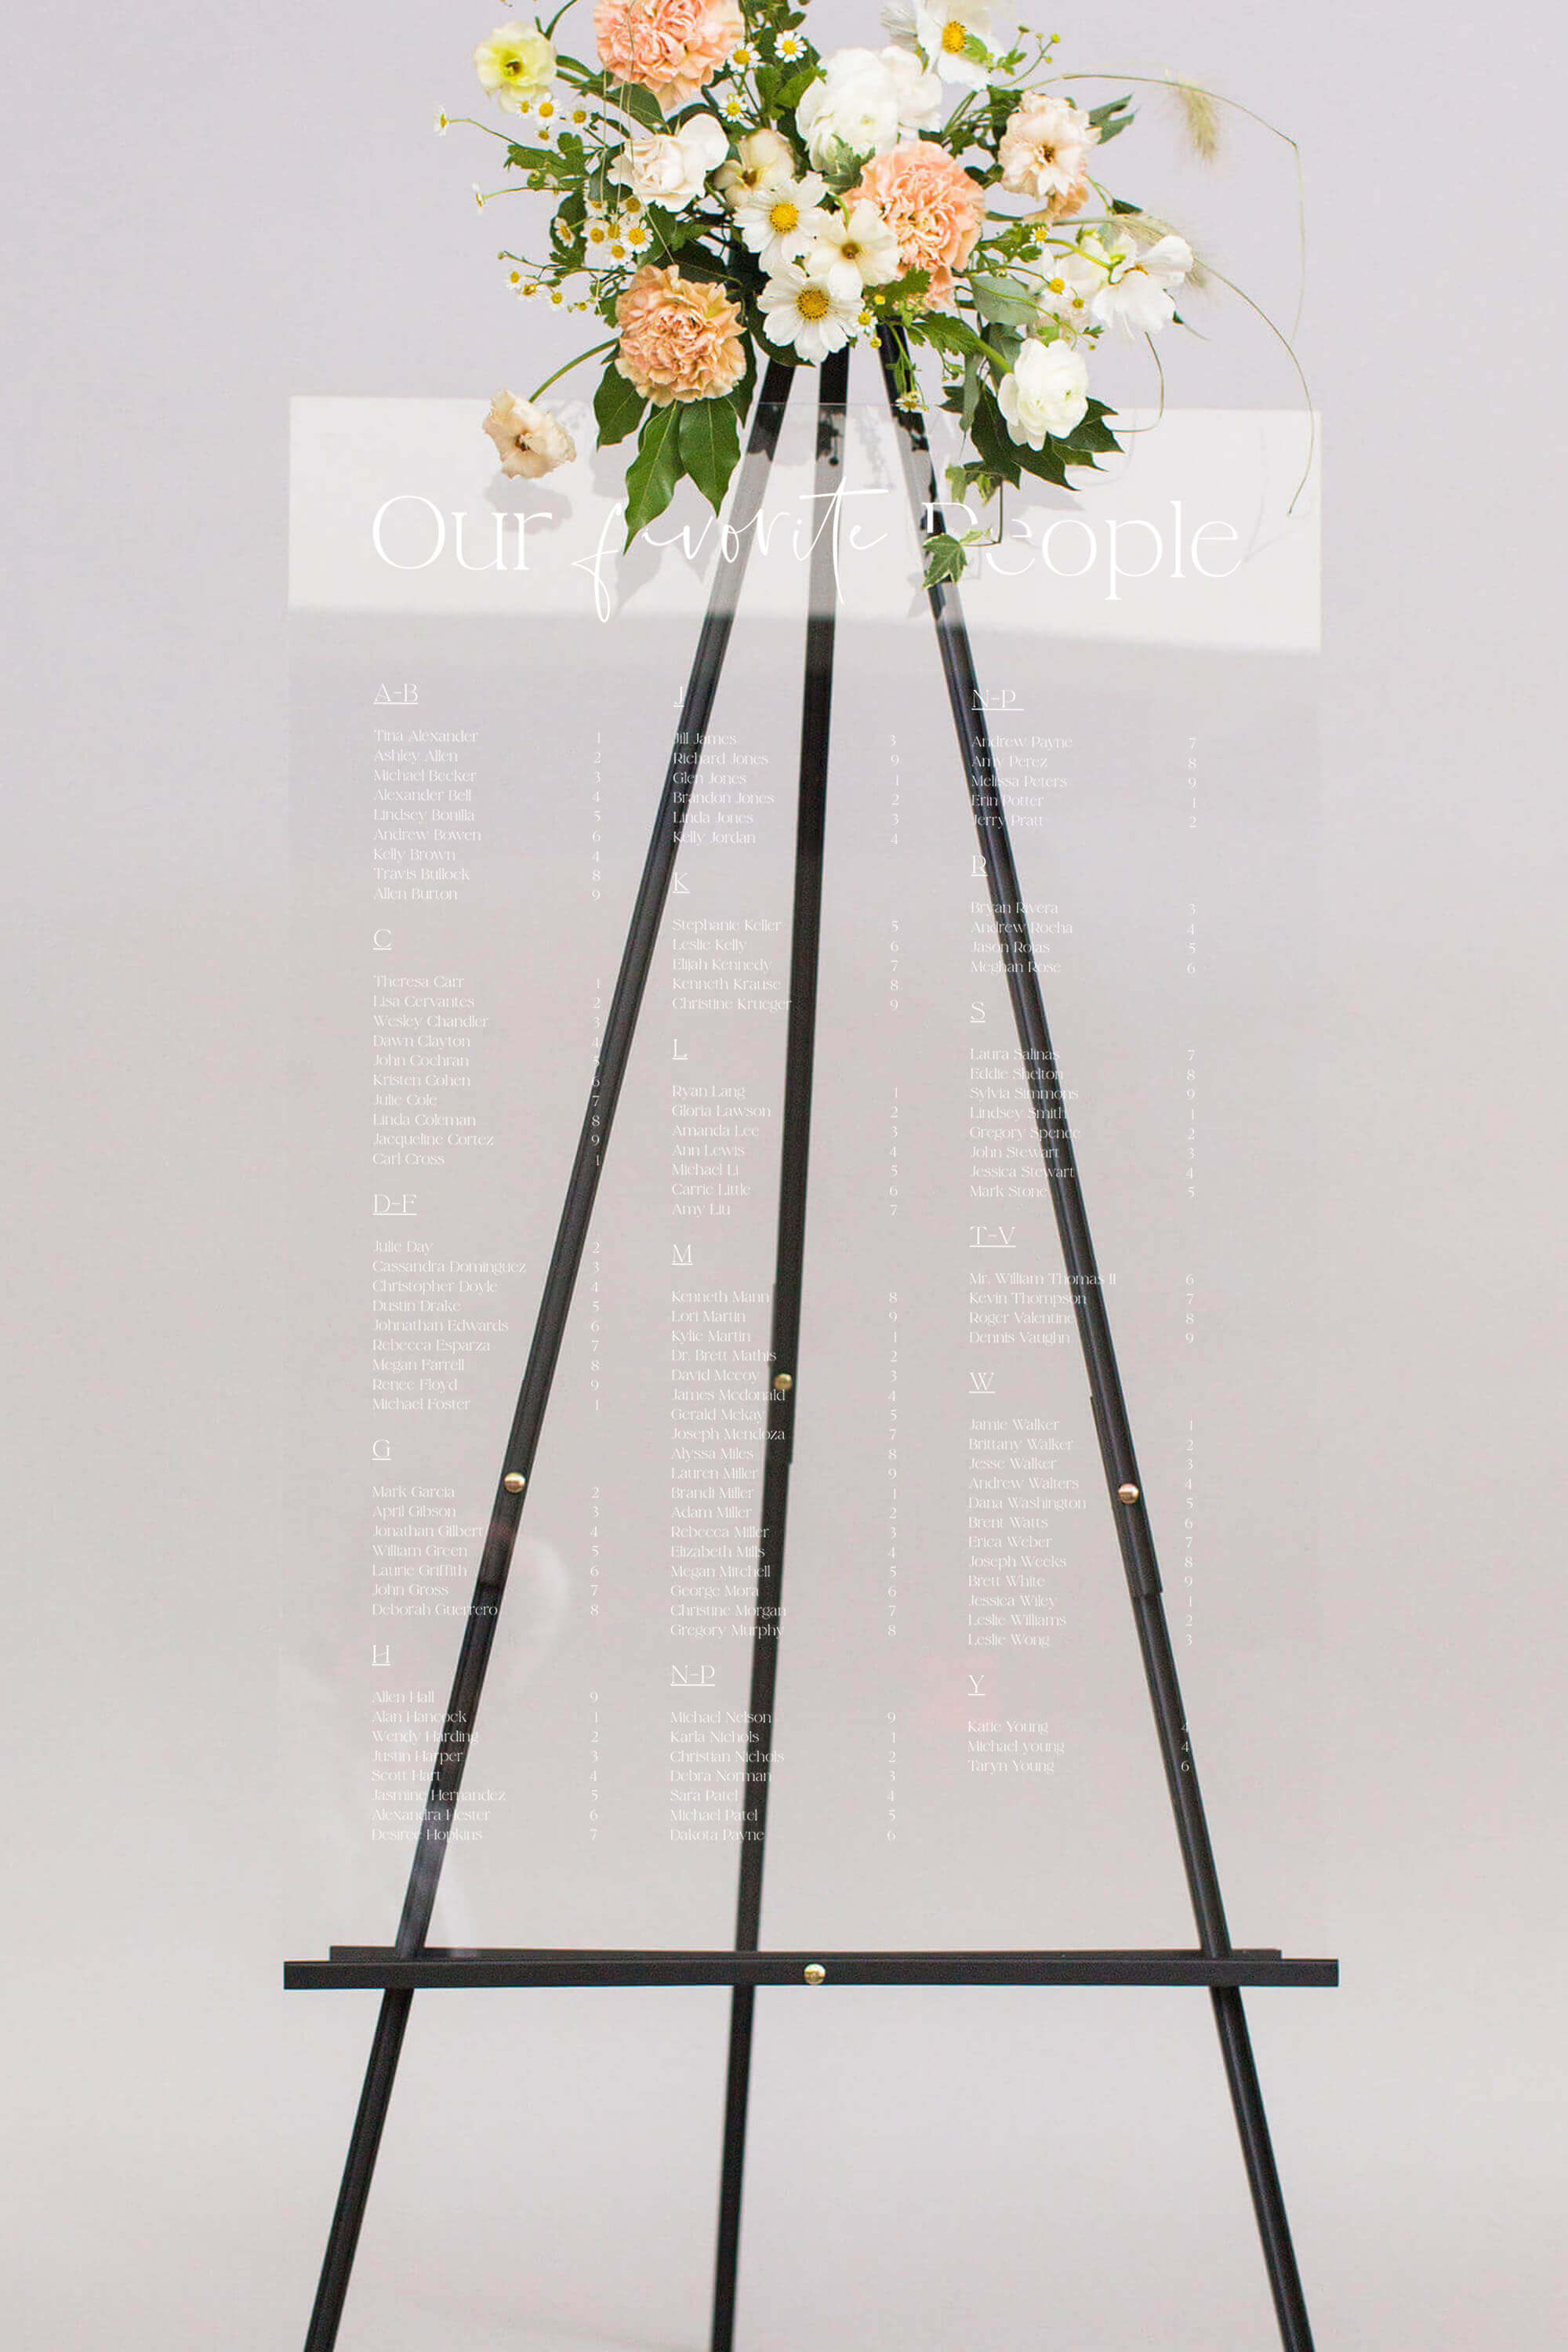 Frosted Acrylic Seating Chart Wedding Lily Roe Co.